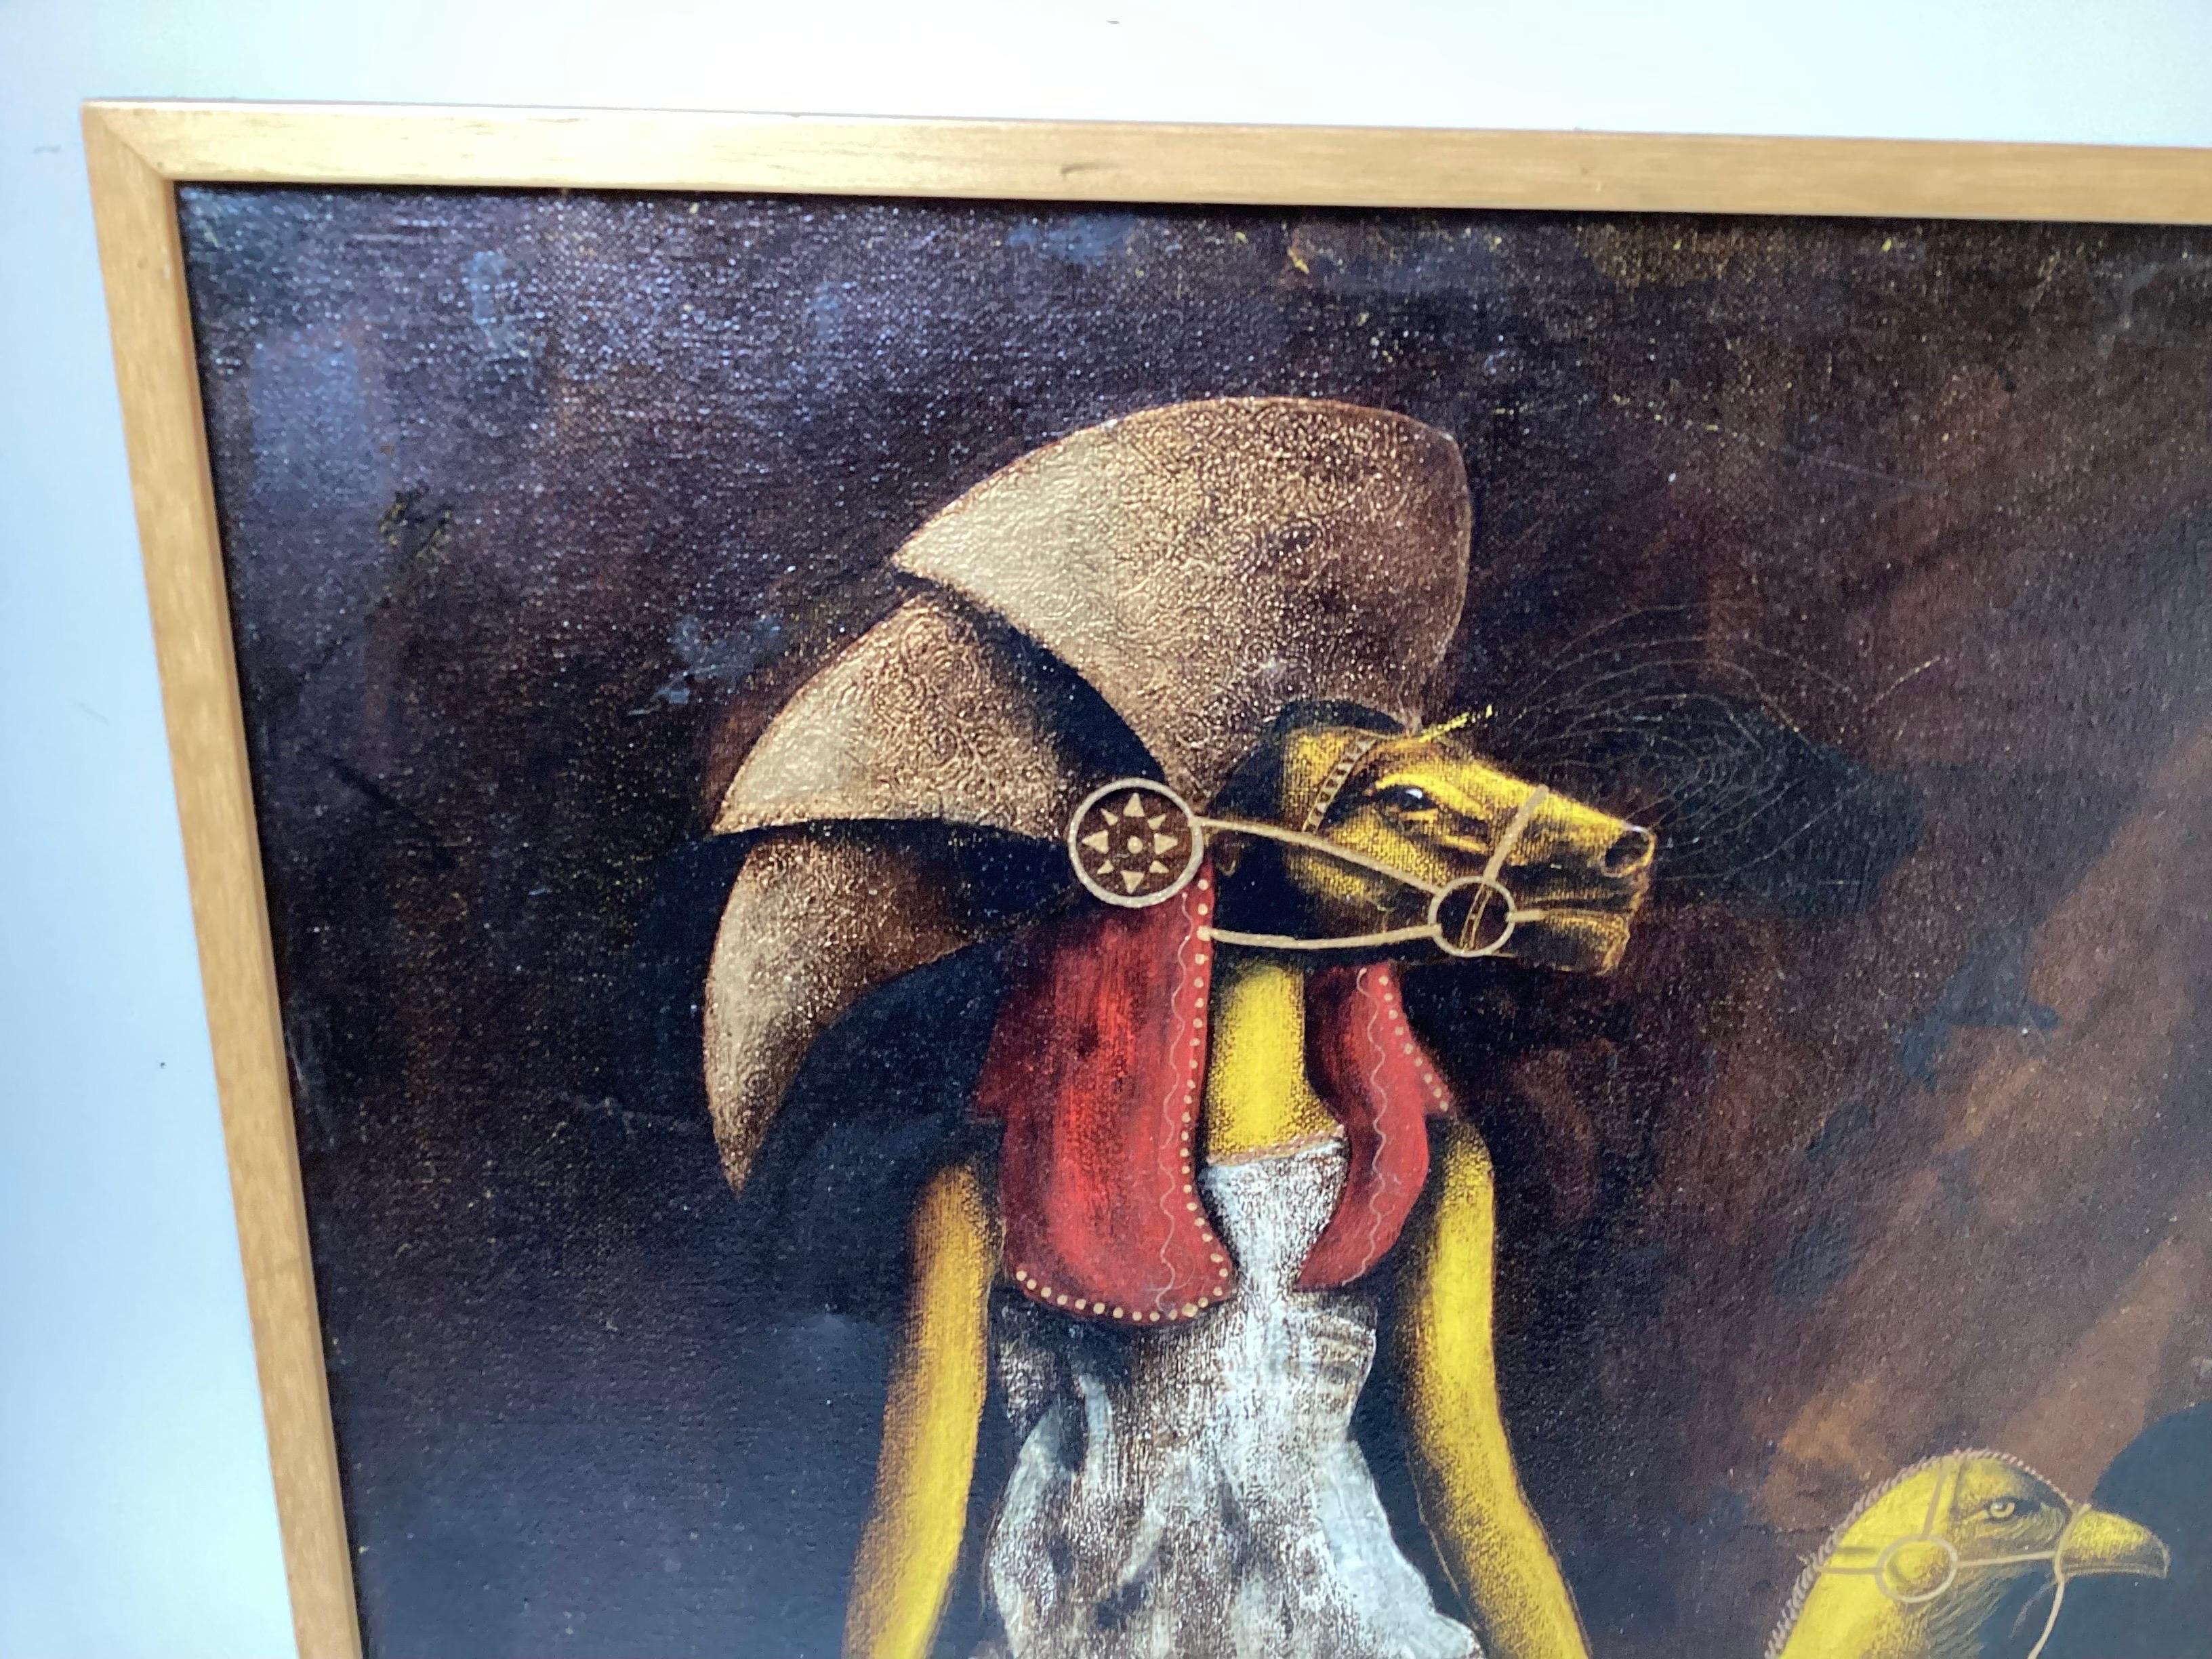 An oil on canvas painting signed by the artist Porras and dated 1999. A surrealist style of a woman wearing a horse themed helmet with a baby holding the reins of a mystical creature. The illuminating colors of gold and yellows and shadowed